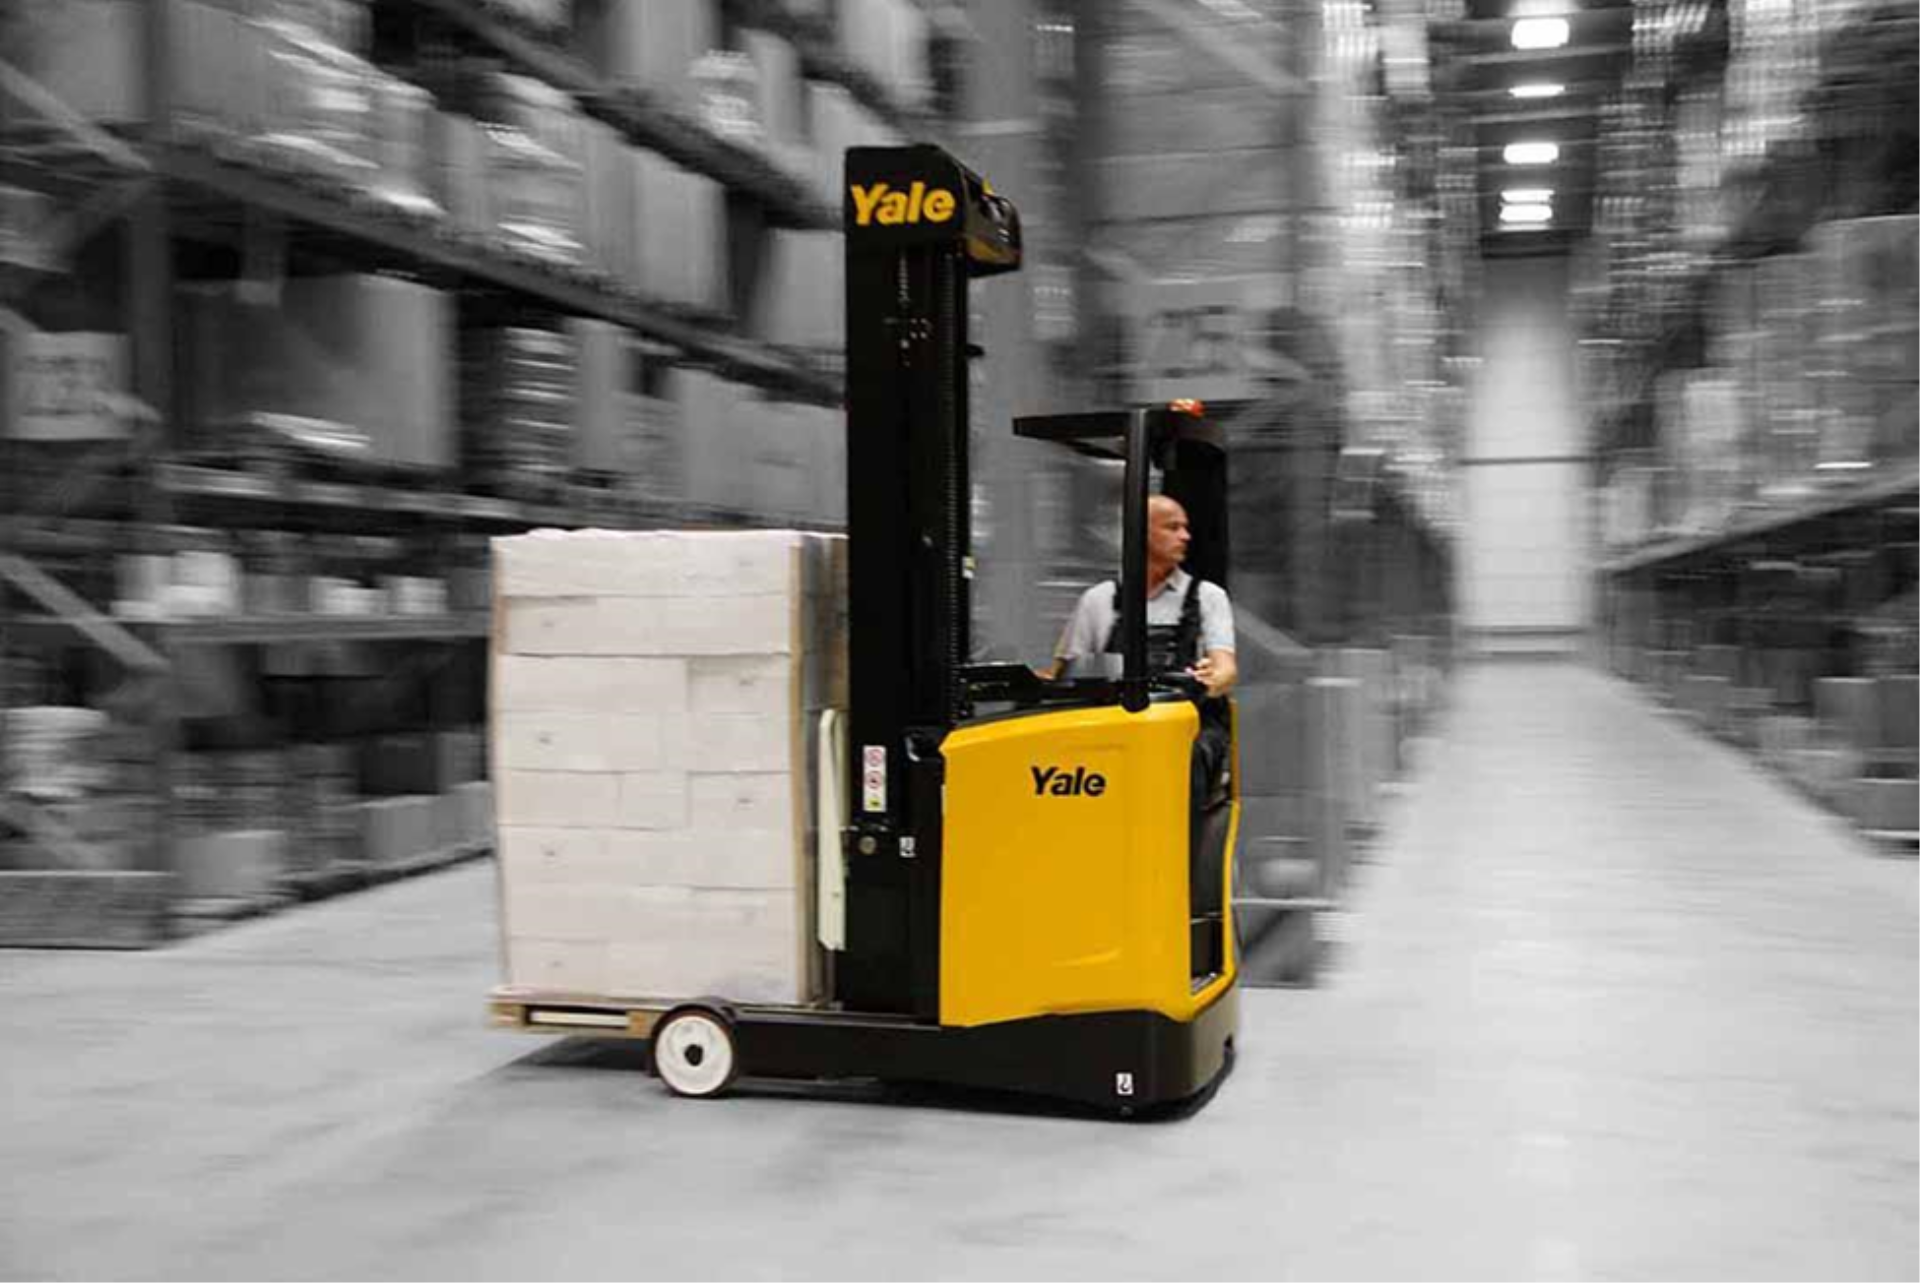 Considerations for Operating a Reach Truck Forklift